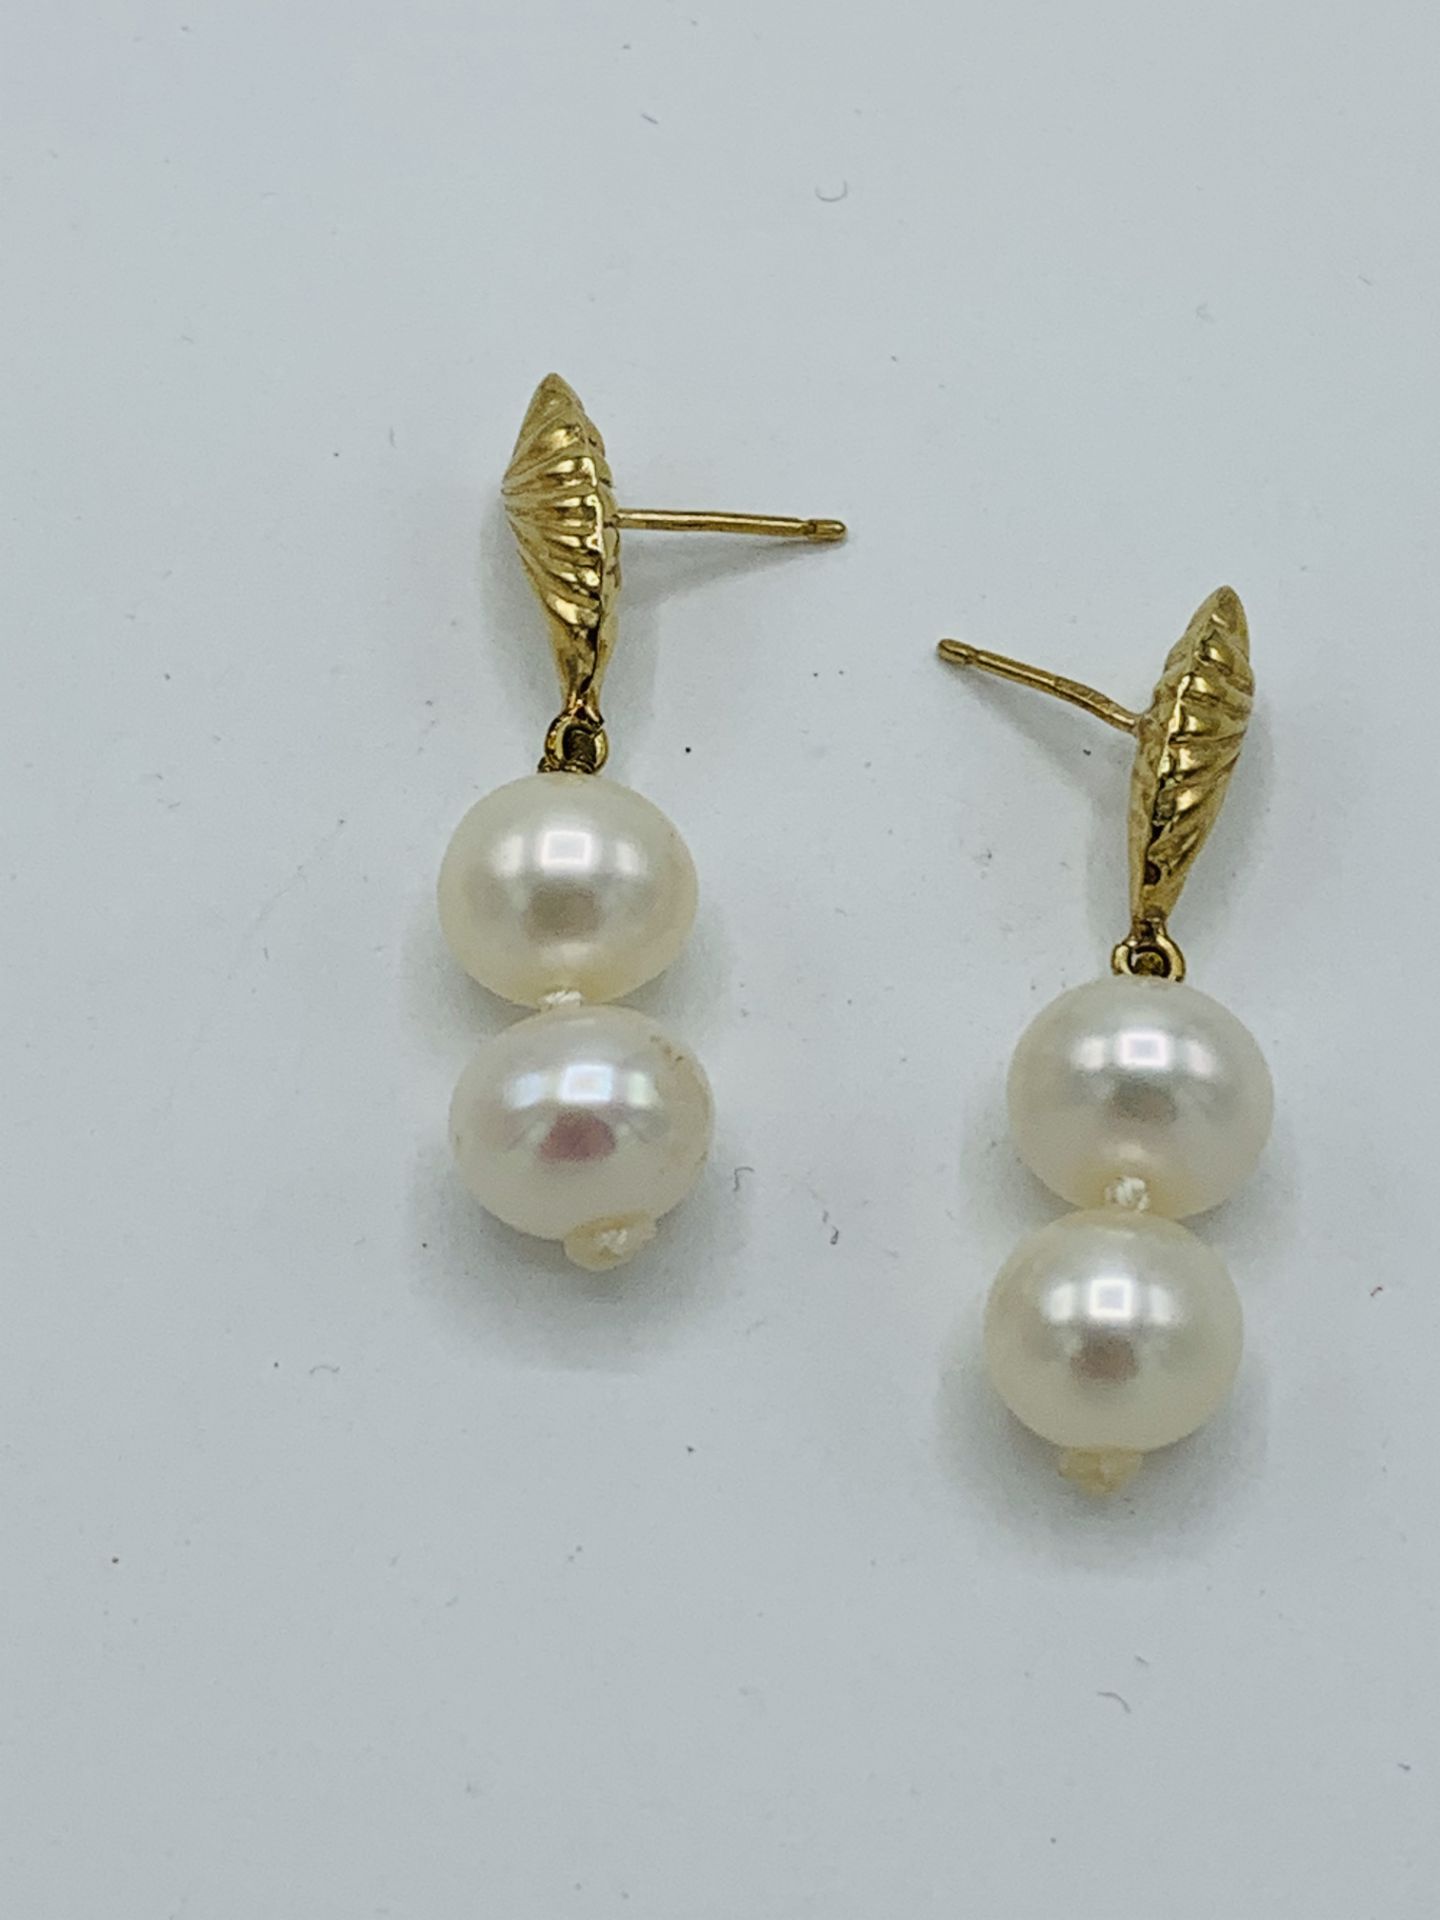 9ct gold and pearl drop earrings. Estimate £20-30. - Image 2 of 2